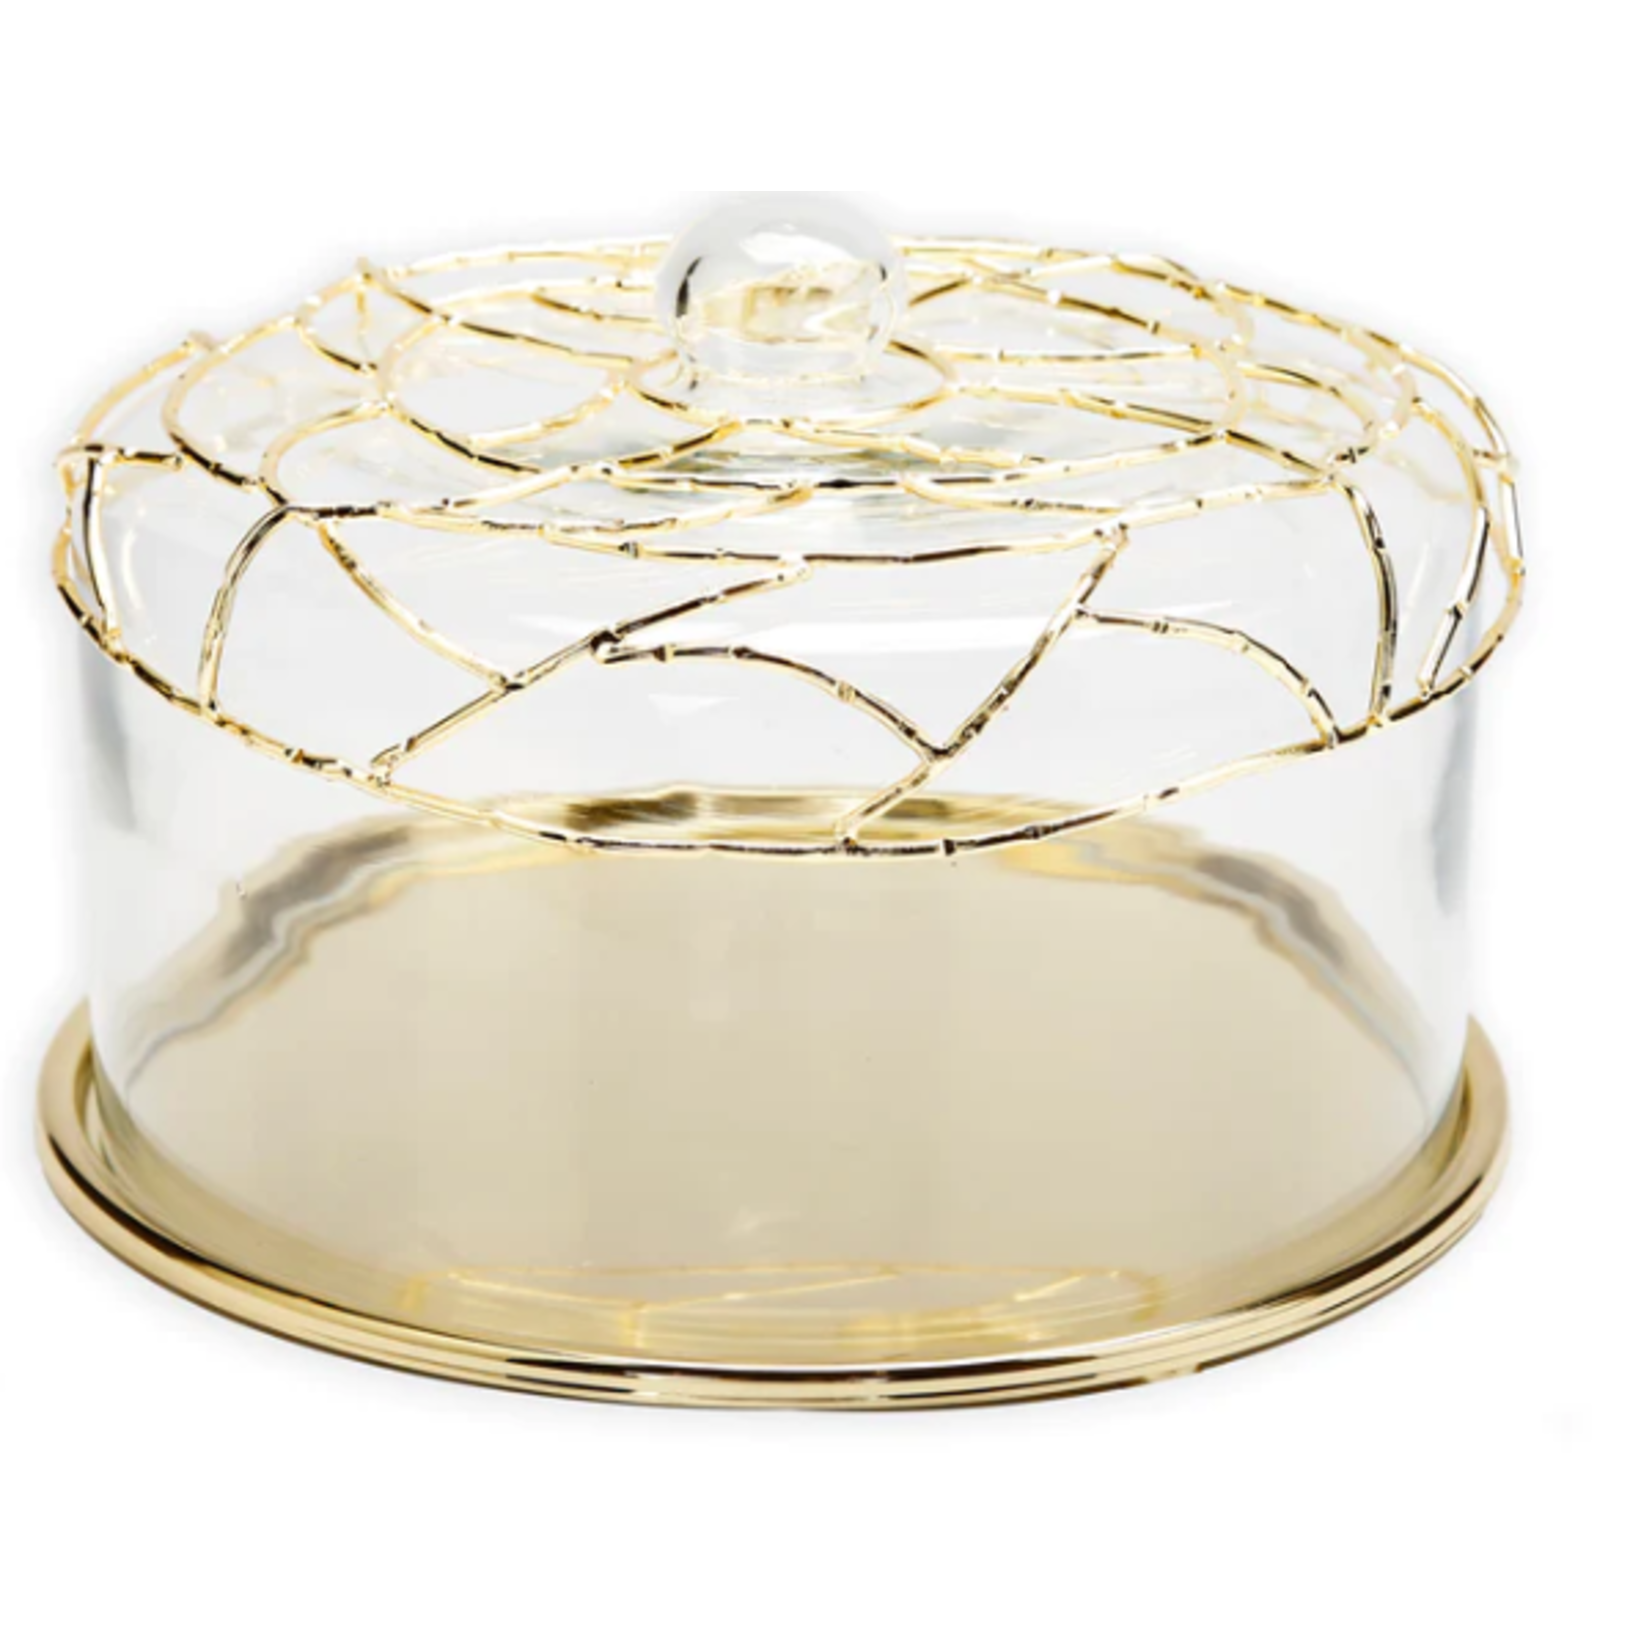 Dome Cake Plate with Gold Mesh Design